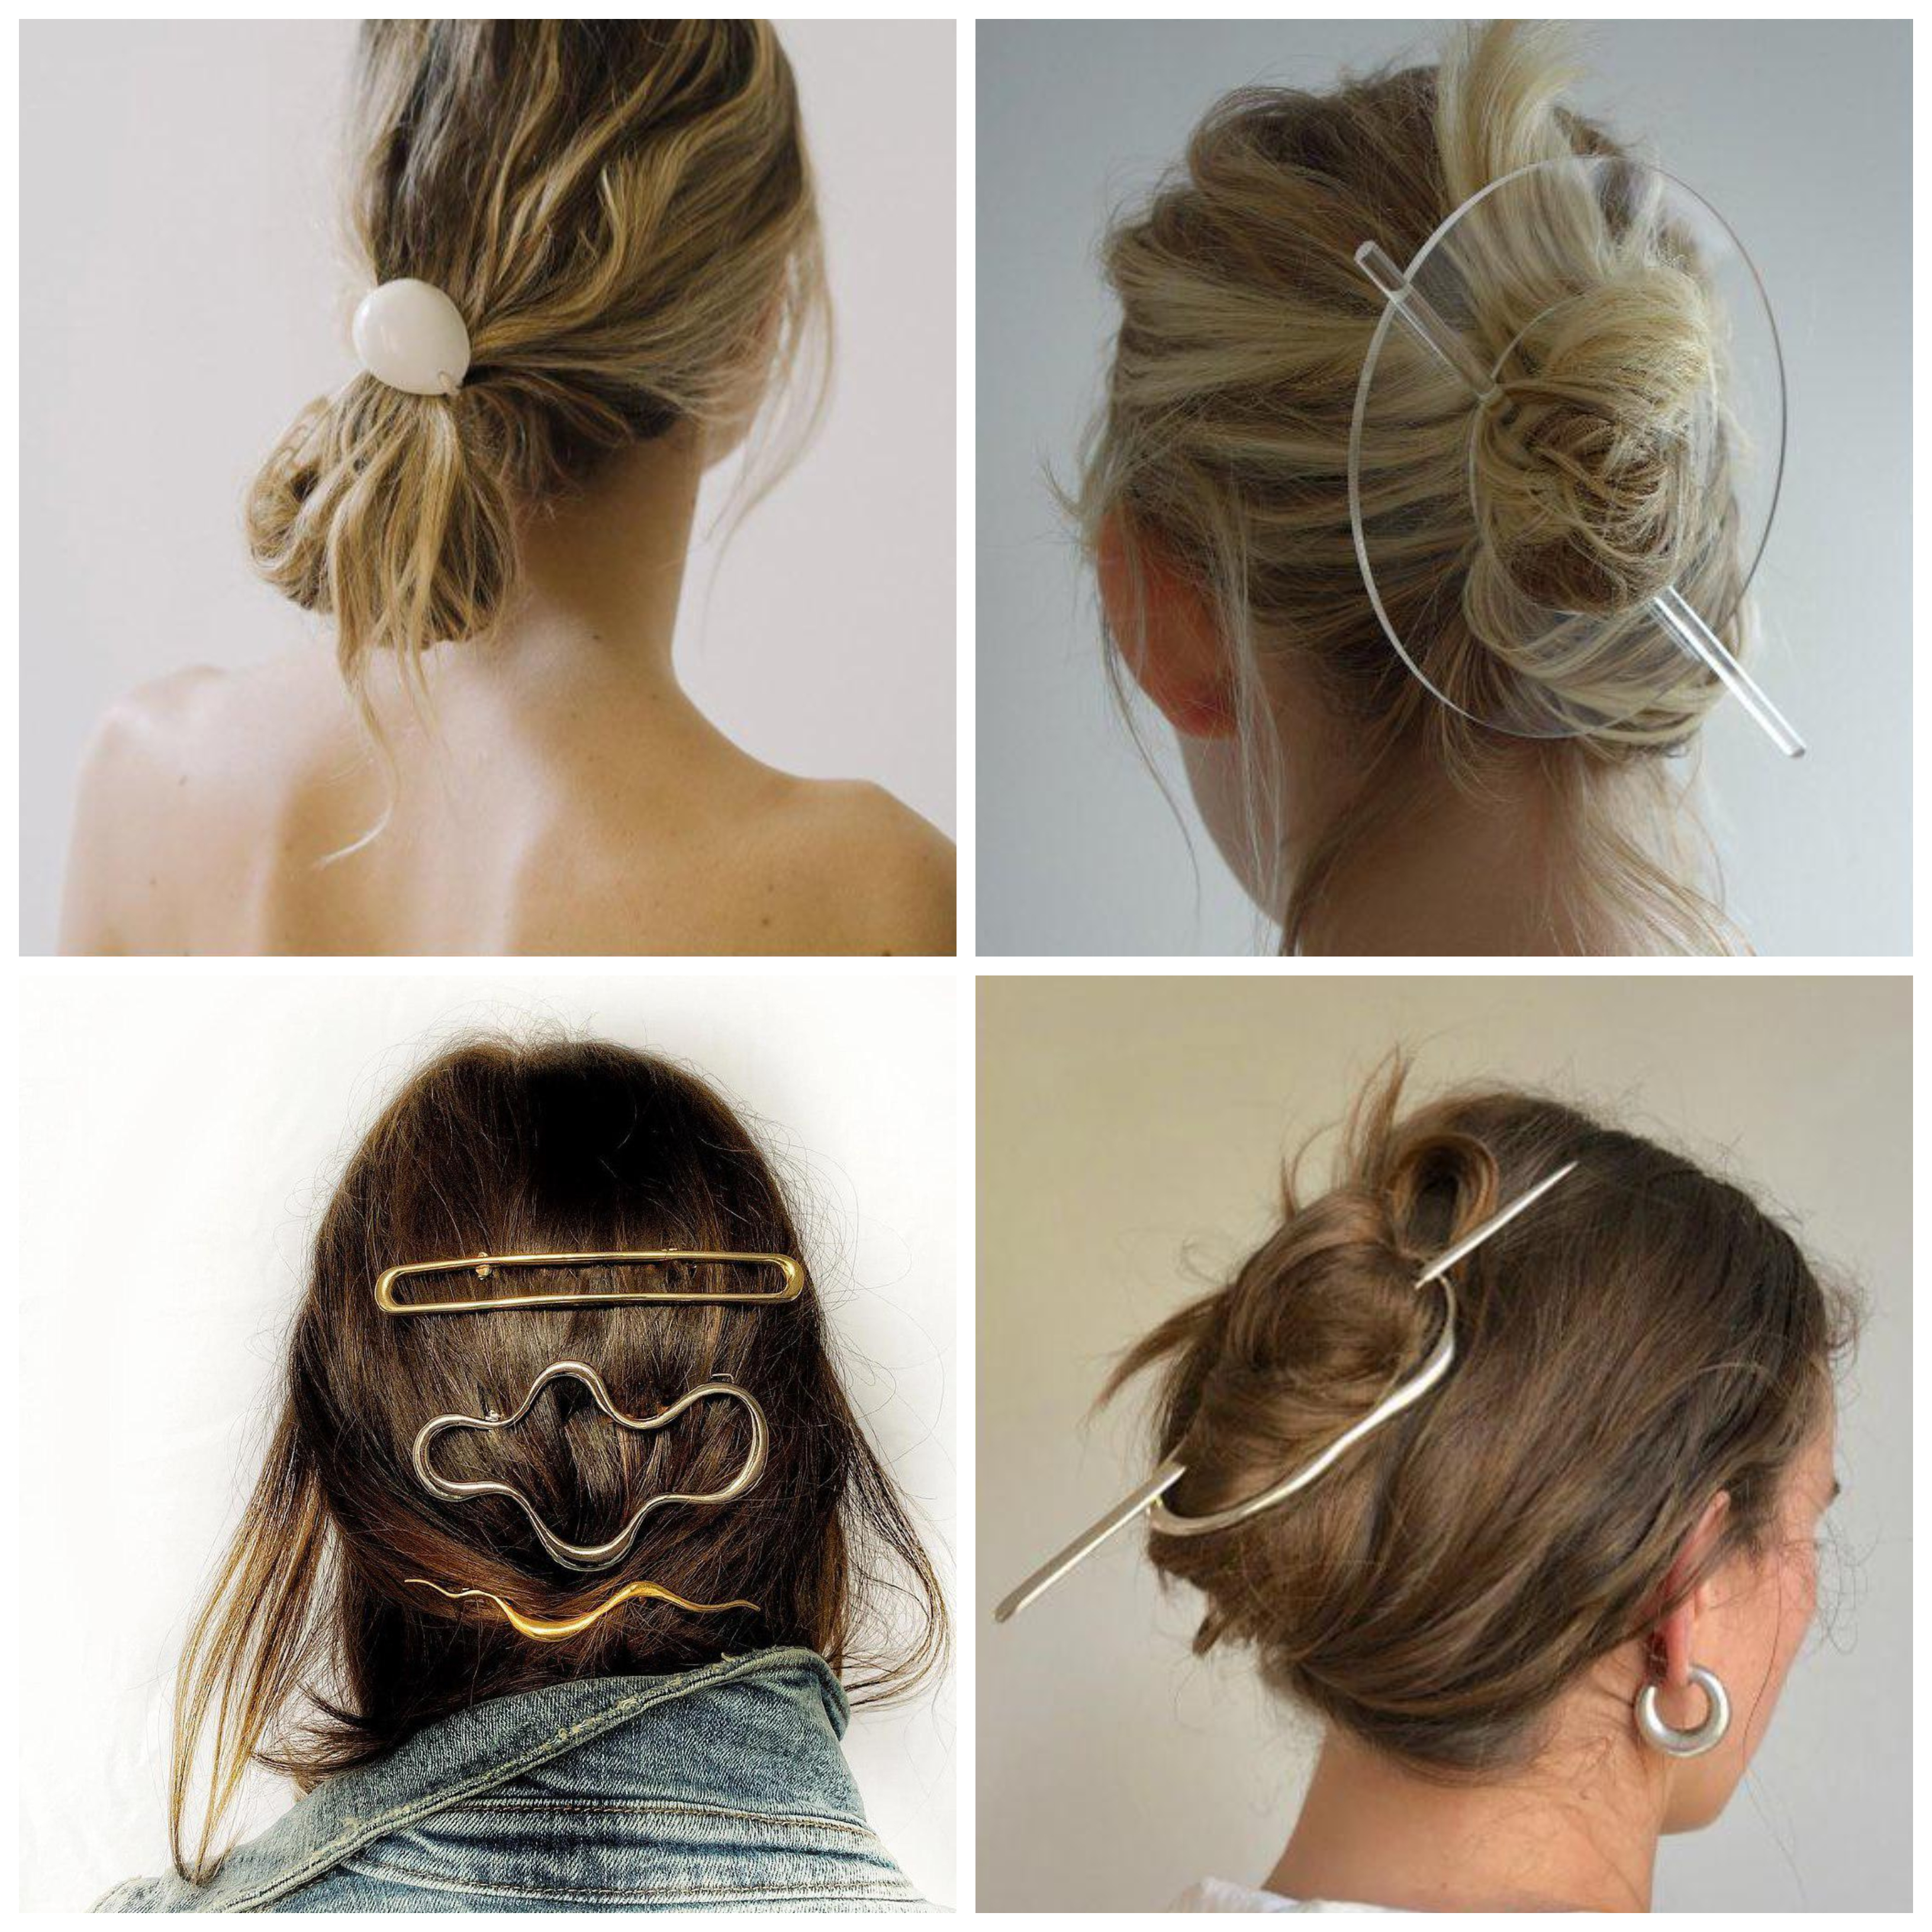 Minimalism Inspired Hair Clips